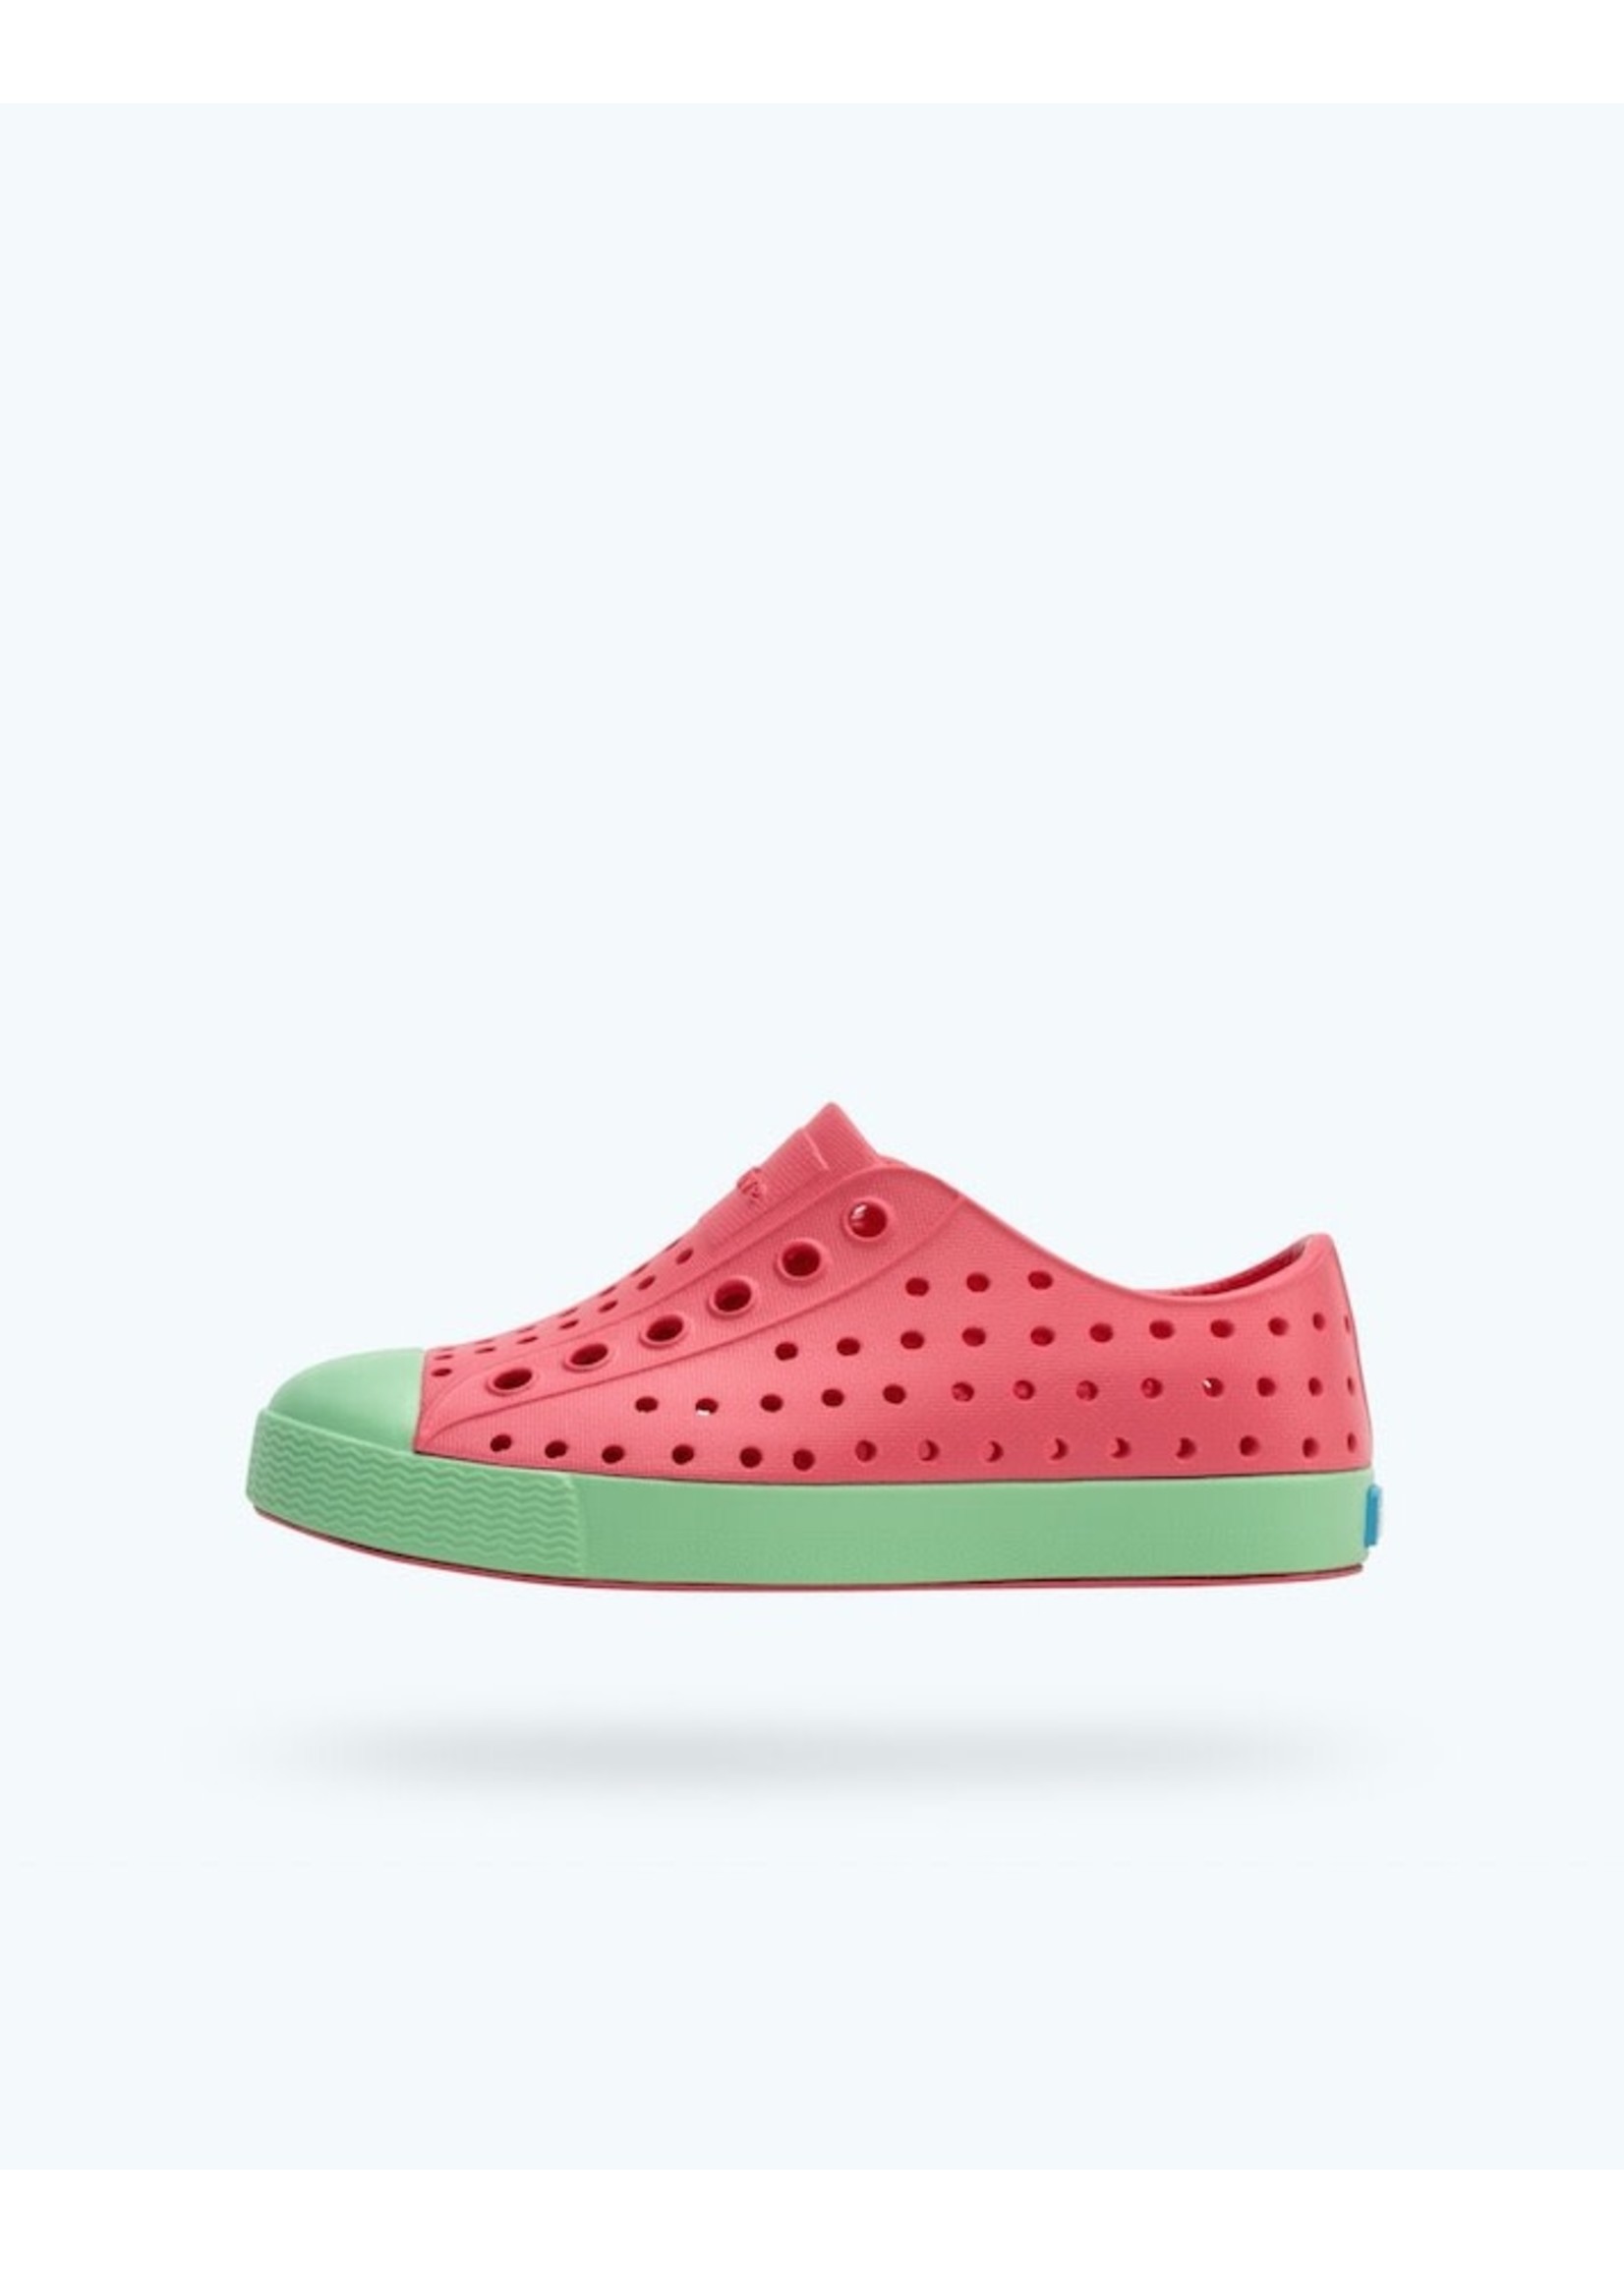 Native Shoes Native Shoes, Jefferson Youth / Junior || Dazzle Pink/ Candy Green